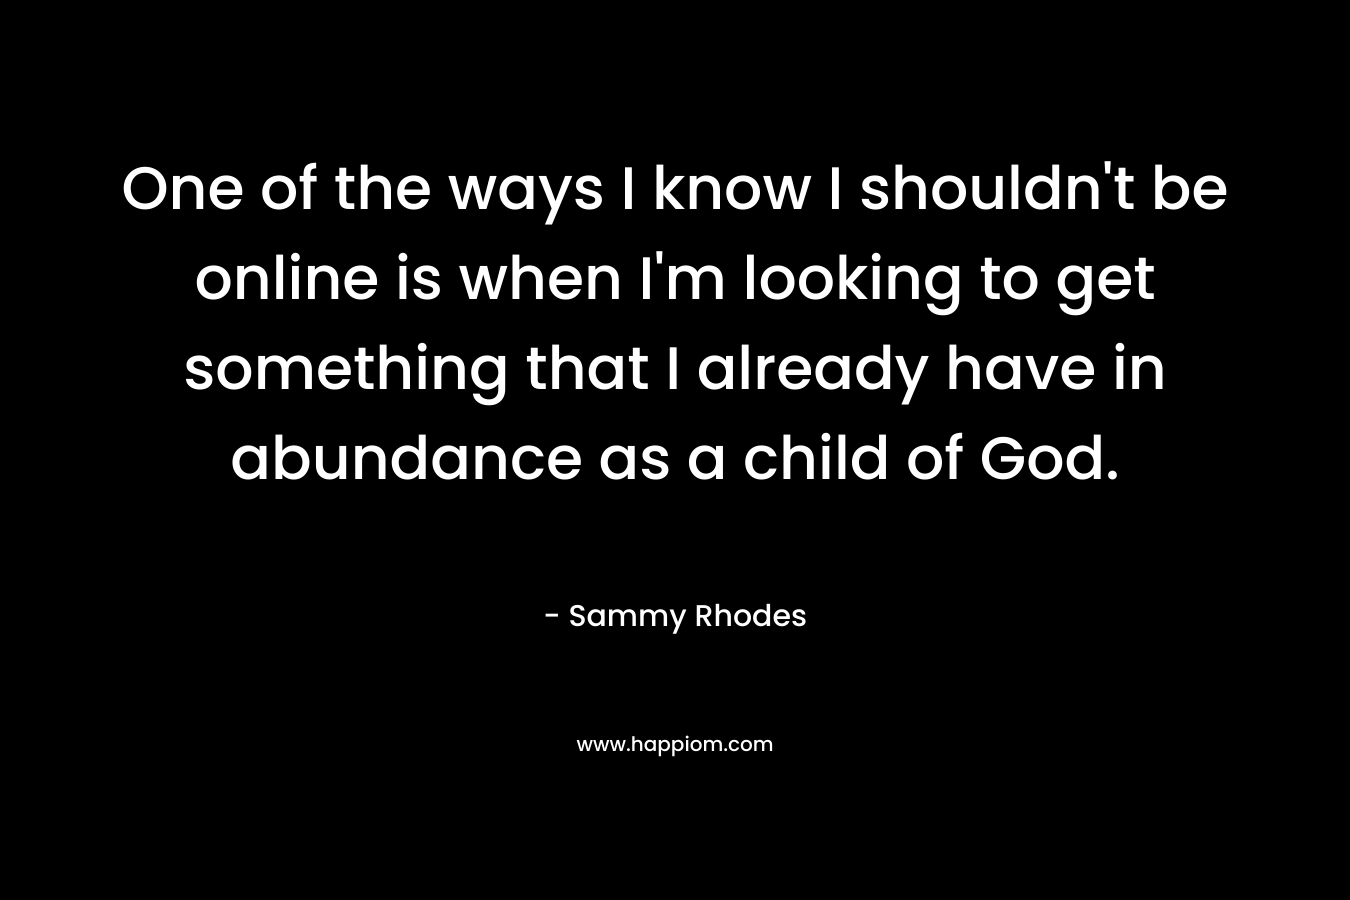 One of the ways I know I shouldn't be online is when I'm looking to get something that I already have in abundance as a child of God.